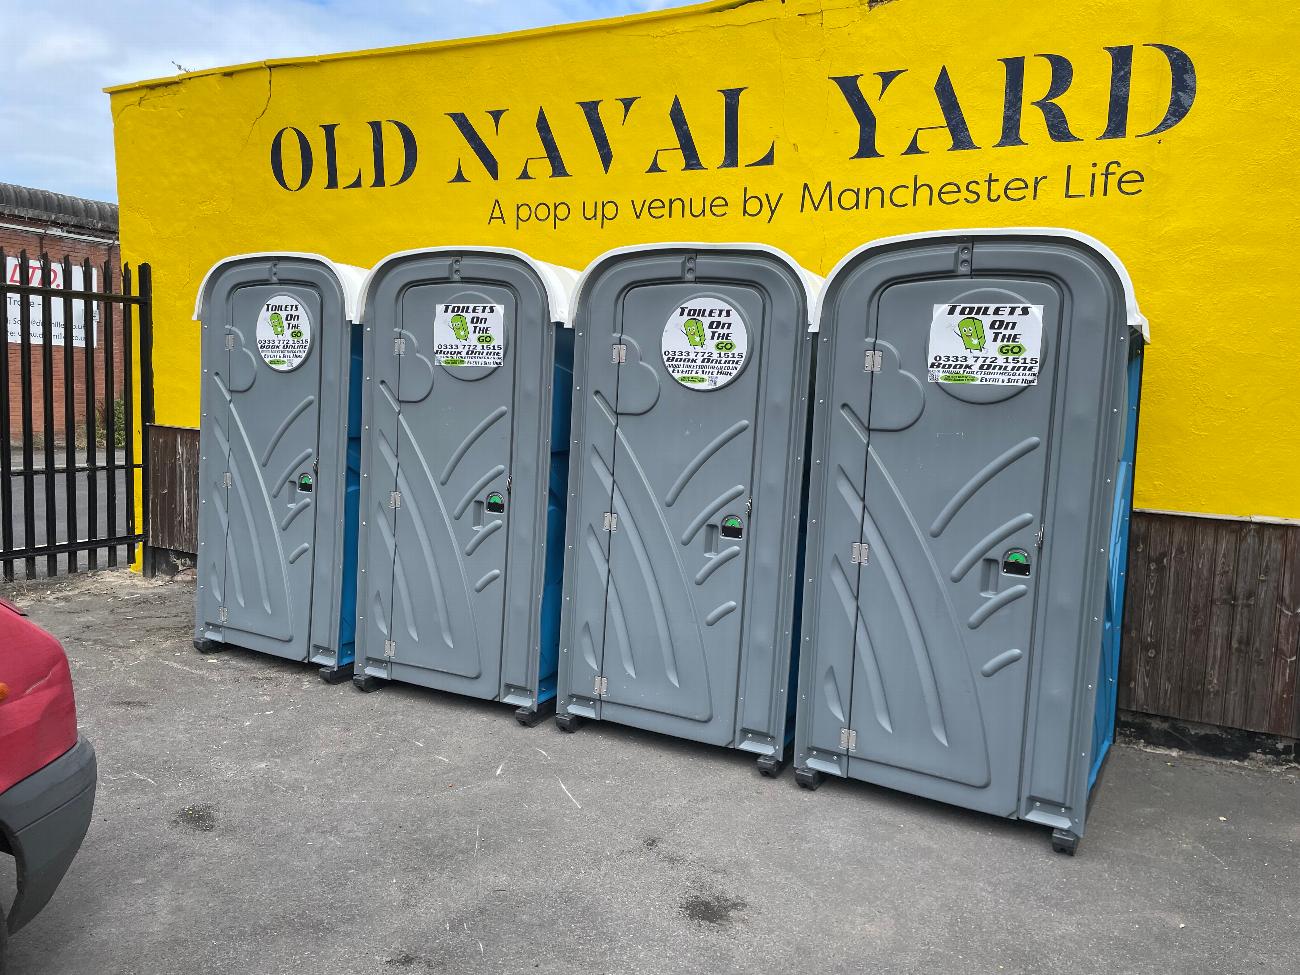 Gallery | Portable Toilet Loo Hire Rental Company in North West uk and Manchester gallery image 35